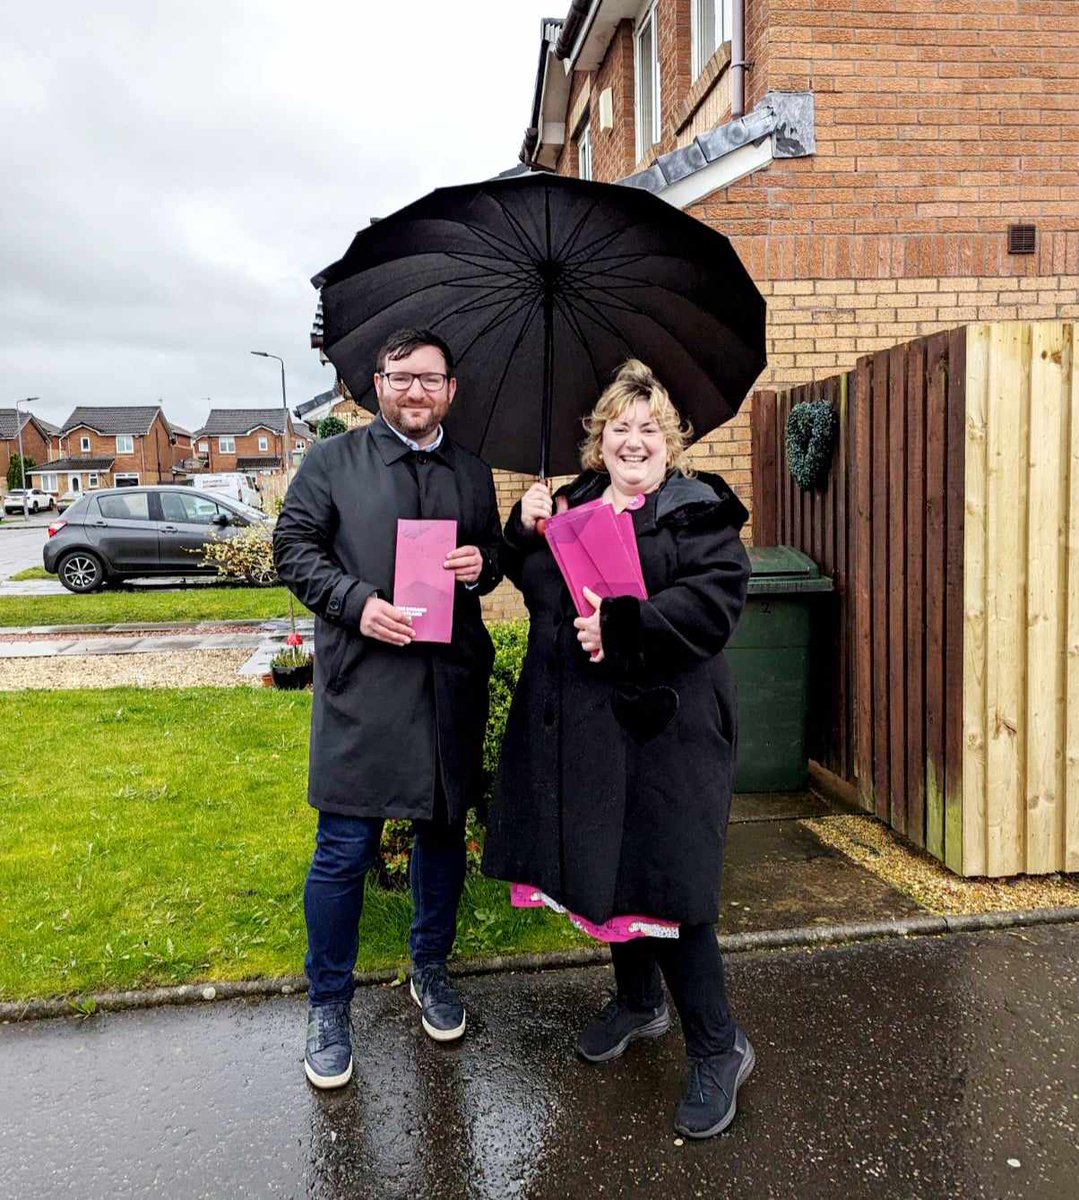 Very wet but really positive response all across Motherwell for @pamela_nash @ScottishLabour Local residents have had enough of paying the price in their daily lives for SNP and Tory Government failures. Only Labour can deliver the change Scotland needs.